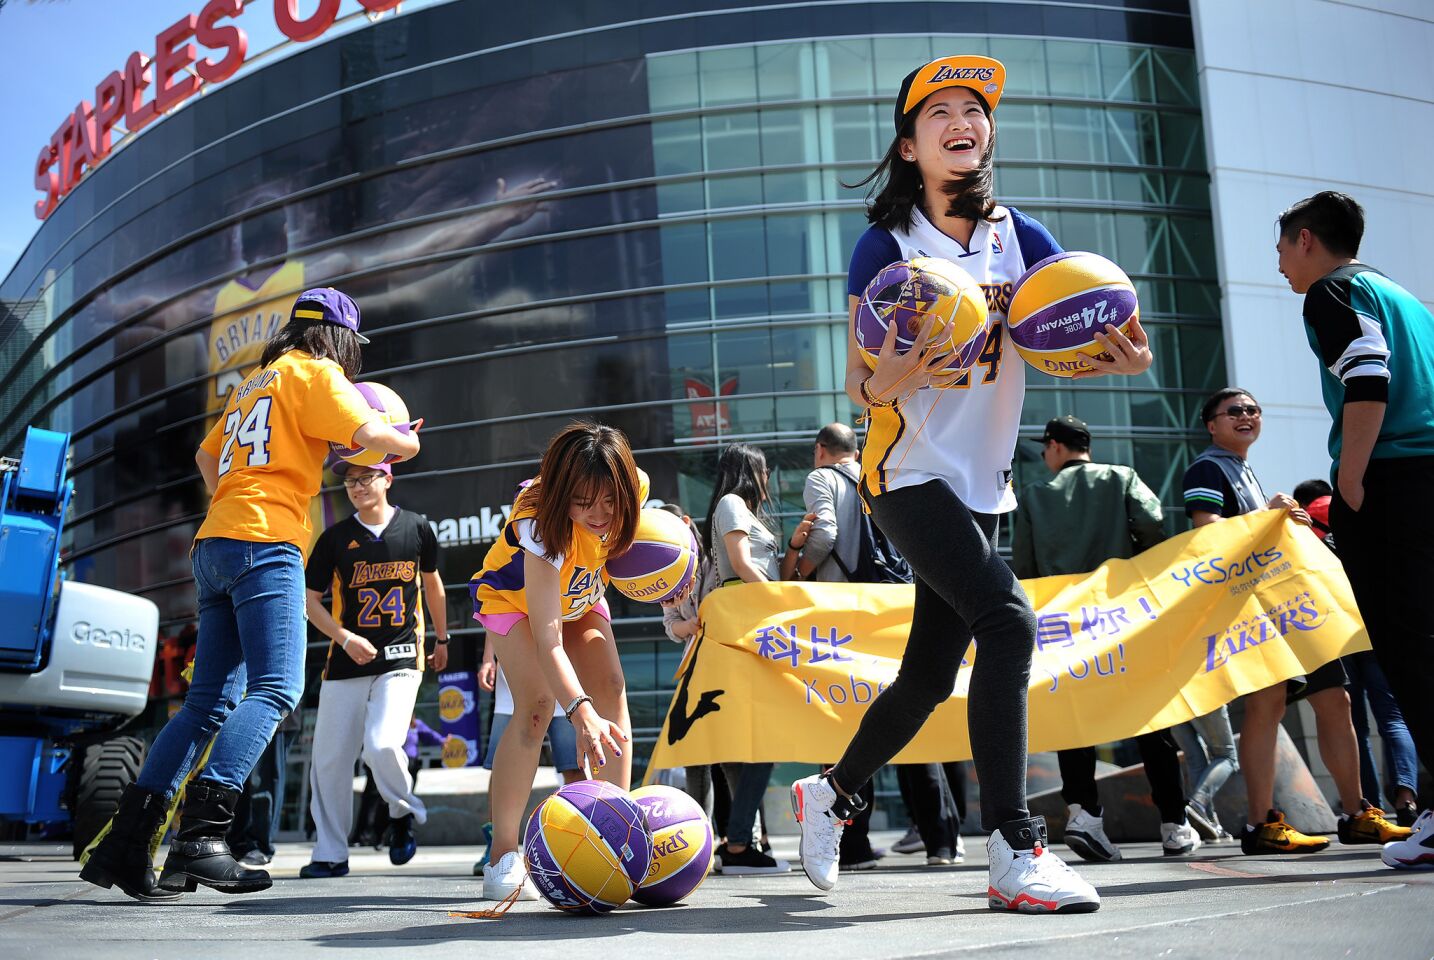 Members of a group of Kobe Bryant fans who flew in from China, including Iris Hong of Beijing, right, get excited outside Staples Center for the player's last game Wednesday.